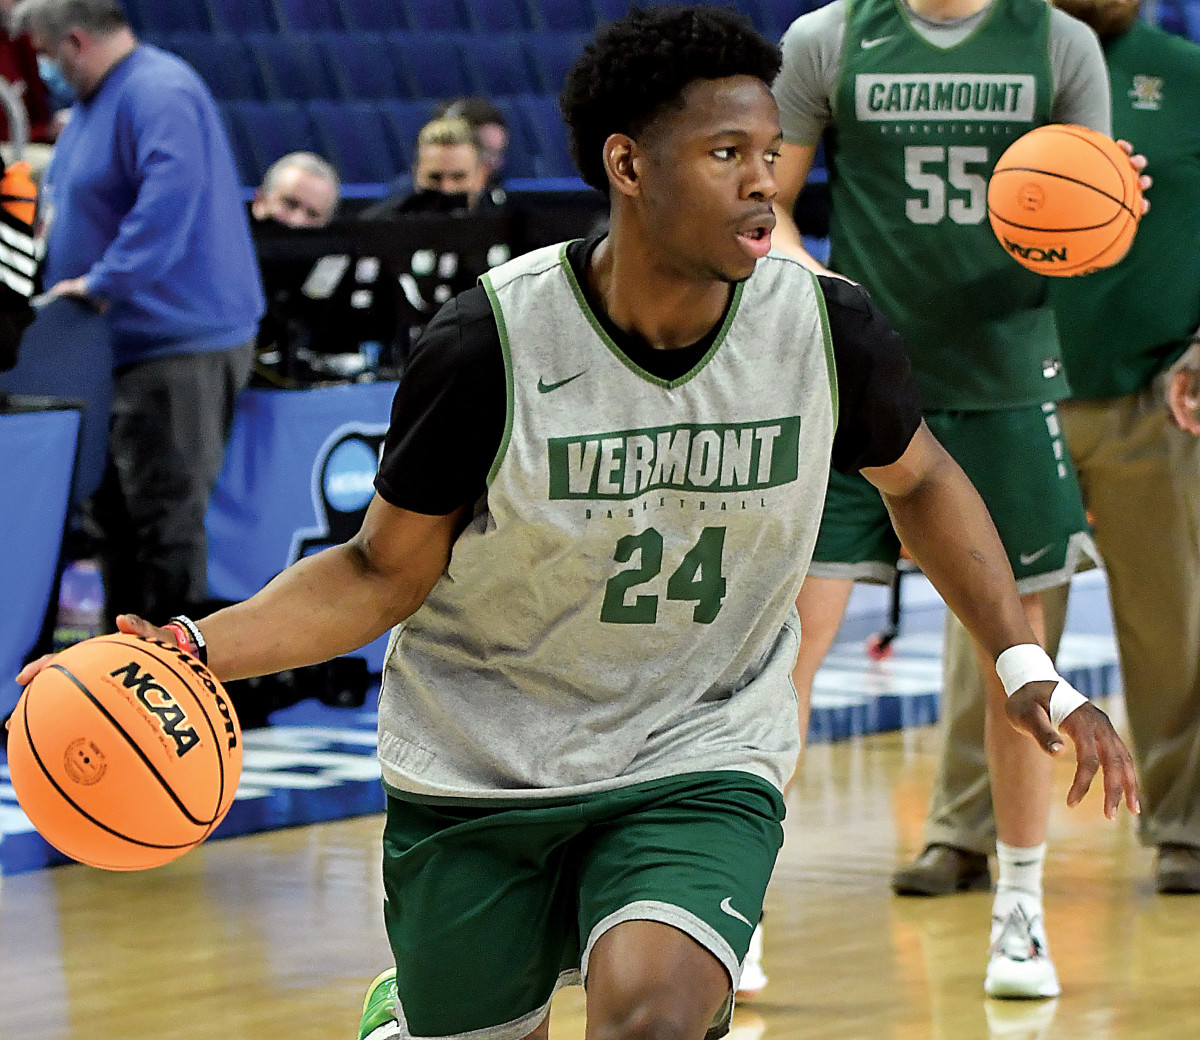 Vermont Catamounts guard Ben Shungu (24) handles the ball during a practice session for the first round of the 2022 NCAA Tournament at KeyBank Center. Vermont fans will have a drive similar to South Arkansas fans heading to Fayetteville, while Arkansas fans would need to drive for at least 21 hours to make the game.